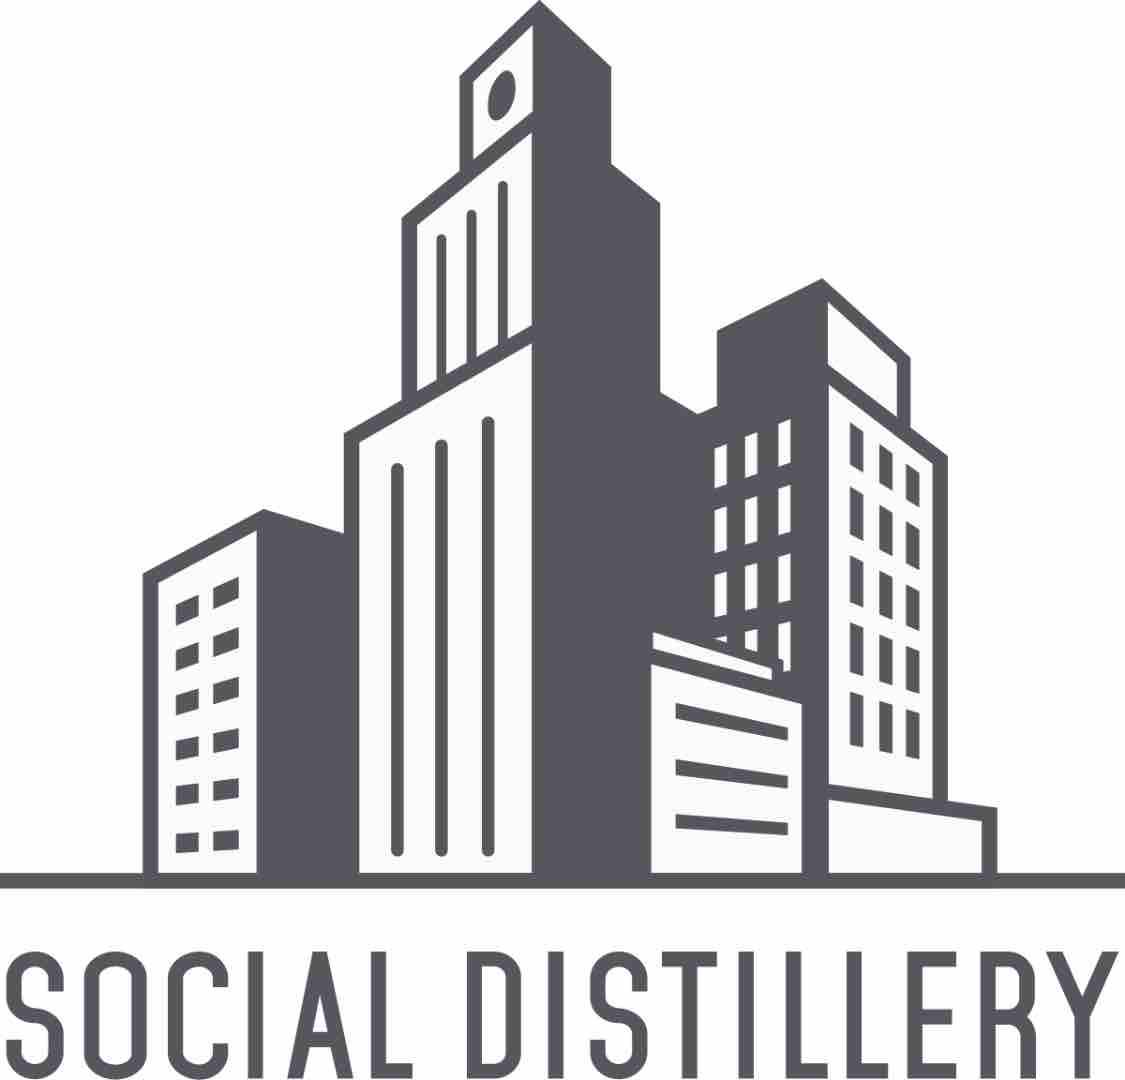 Social Distillery profile on Qualified.One